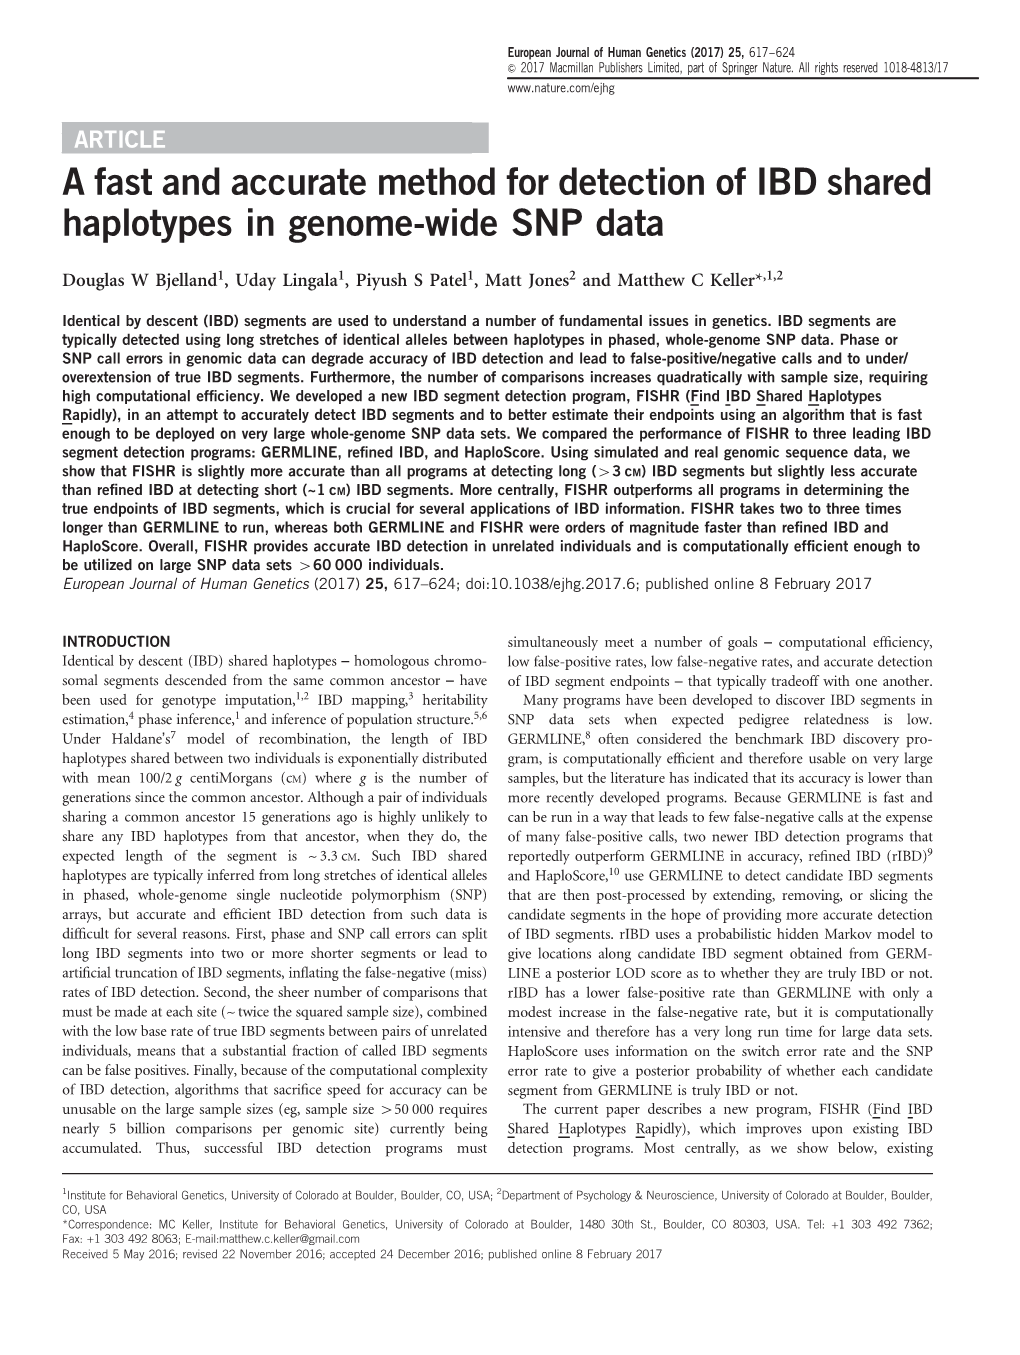 A Fast and Accurate Method for Detection of IBD Shared Haplotypes in Genome-Wide SNP Data